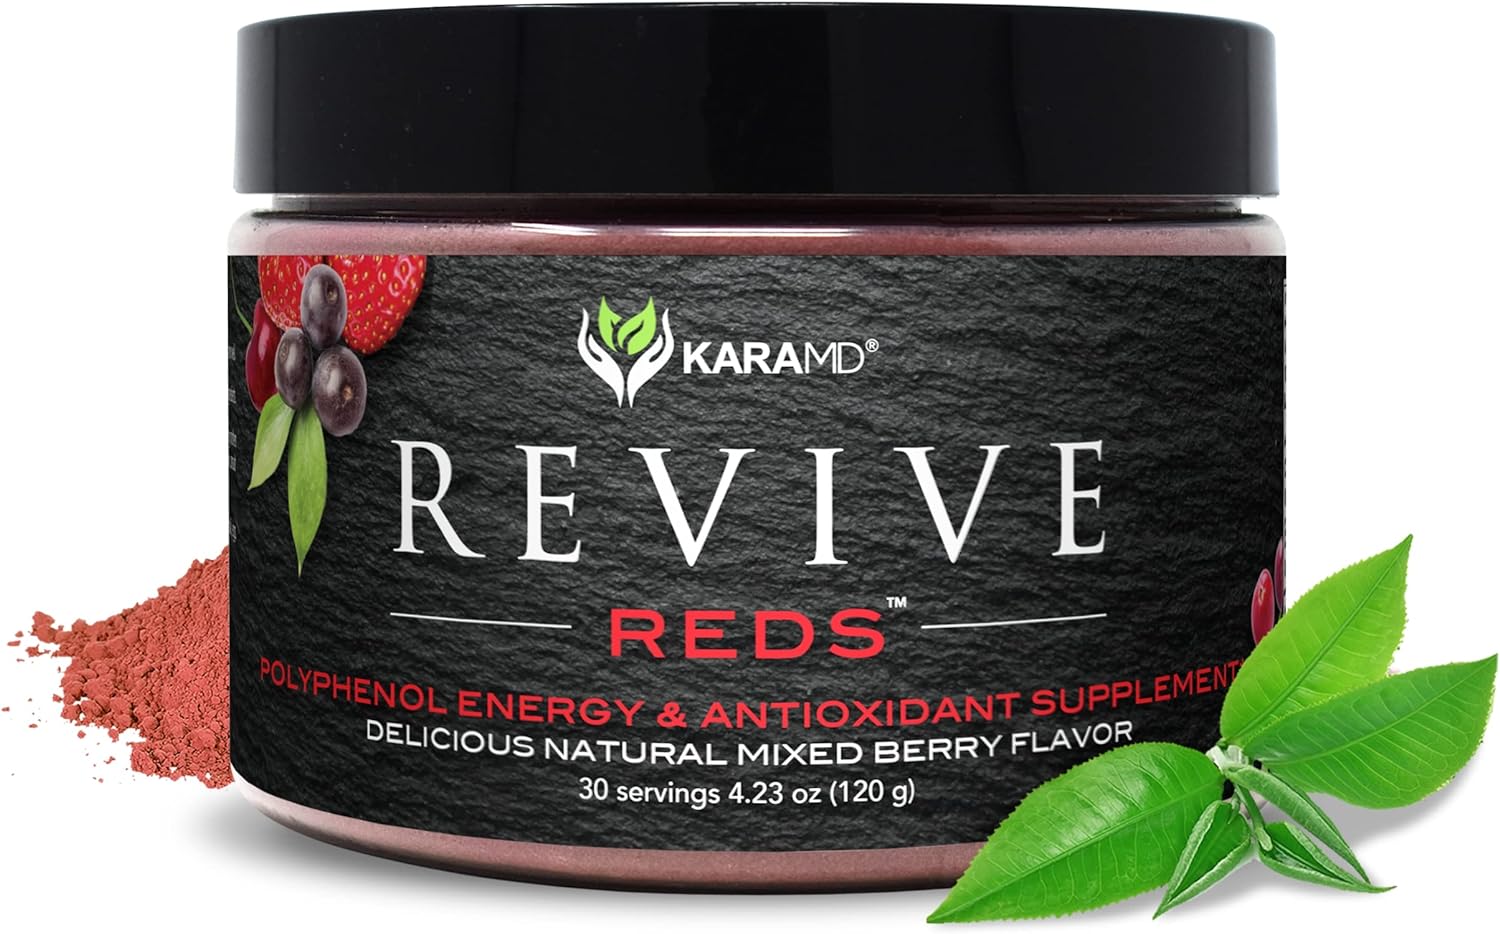 KaraMD Revive Reds - Superfood Powder Supplement for Inflammation & Natural Energy - with Shilajit, Antioxidants & Polyphenols - Mixed Berry Flavor - 30 Concentrated Drink Mix Servings